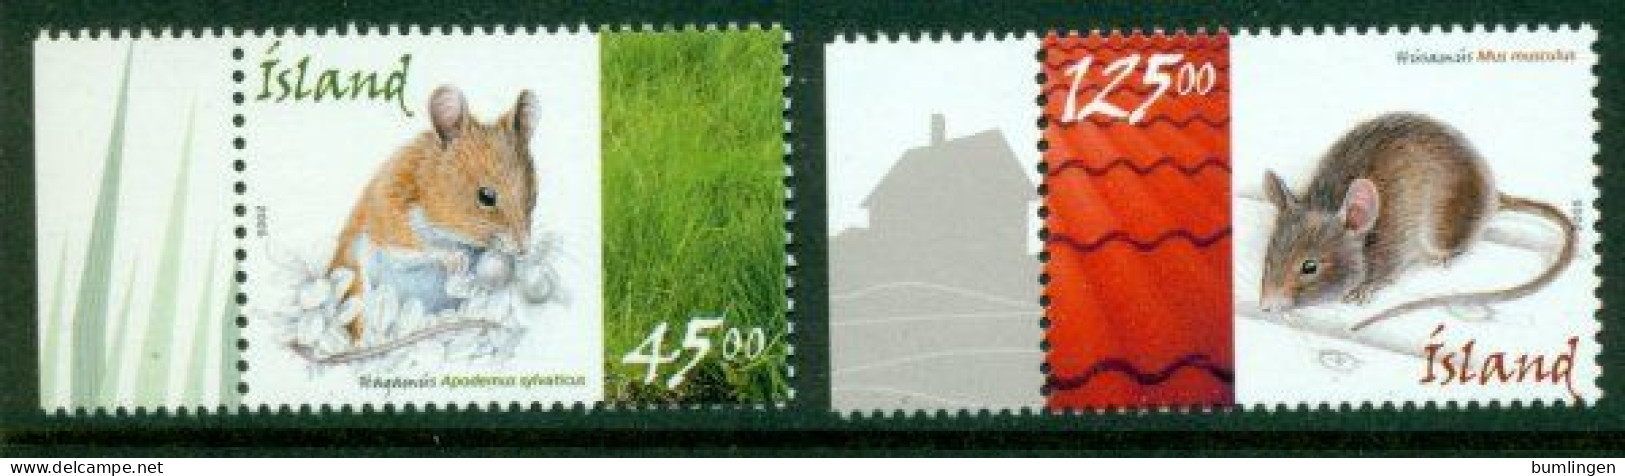 ICELAND 2005 Mi 1087-88** Mices [B640] - Nager